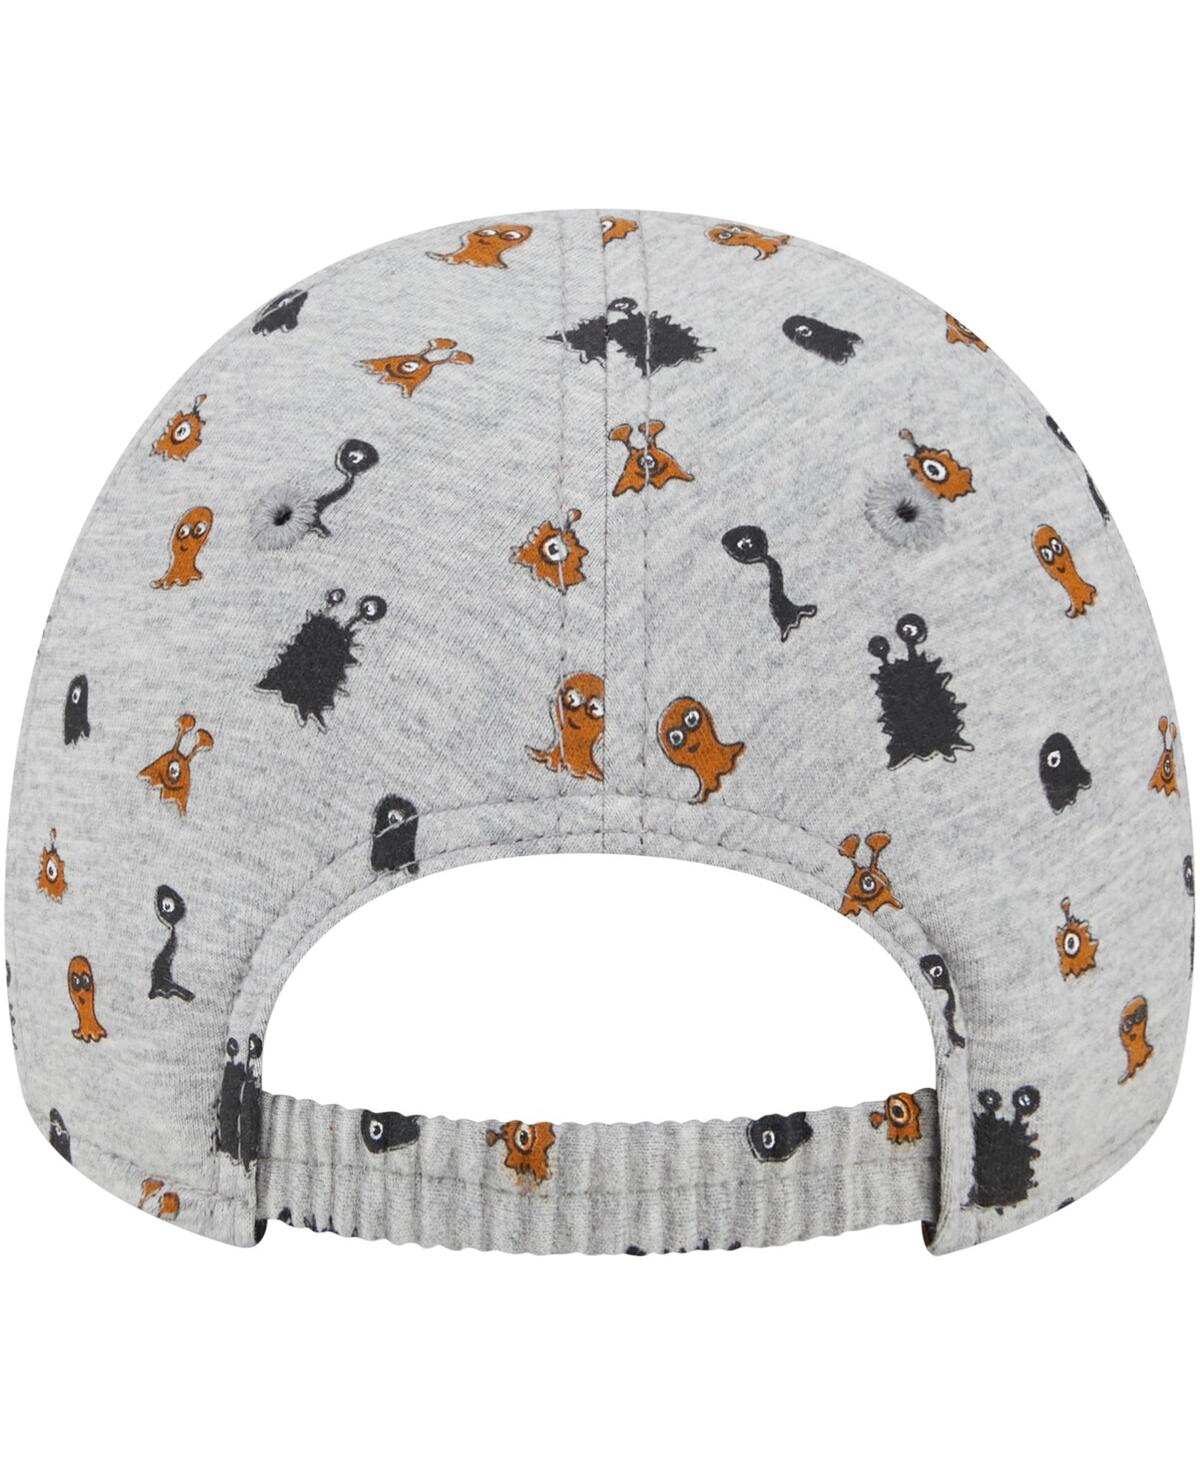 Shop New Era Toddler Boys And Girls  Heather Gray Texas Longhorns Allover Print Critter 9forty Flex Hat